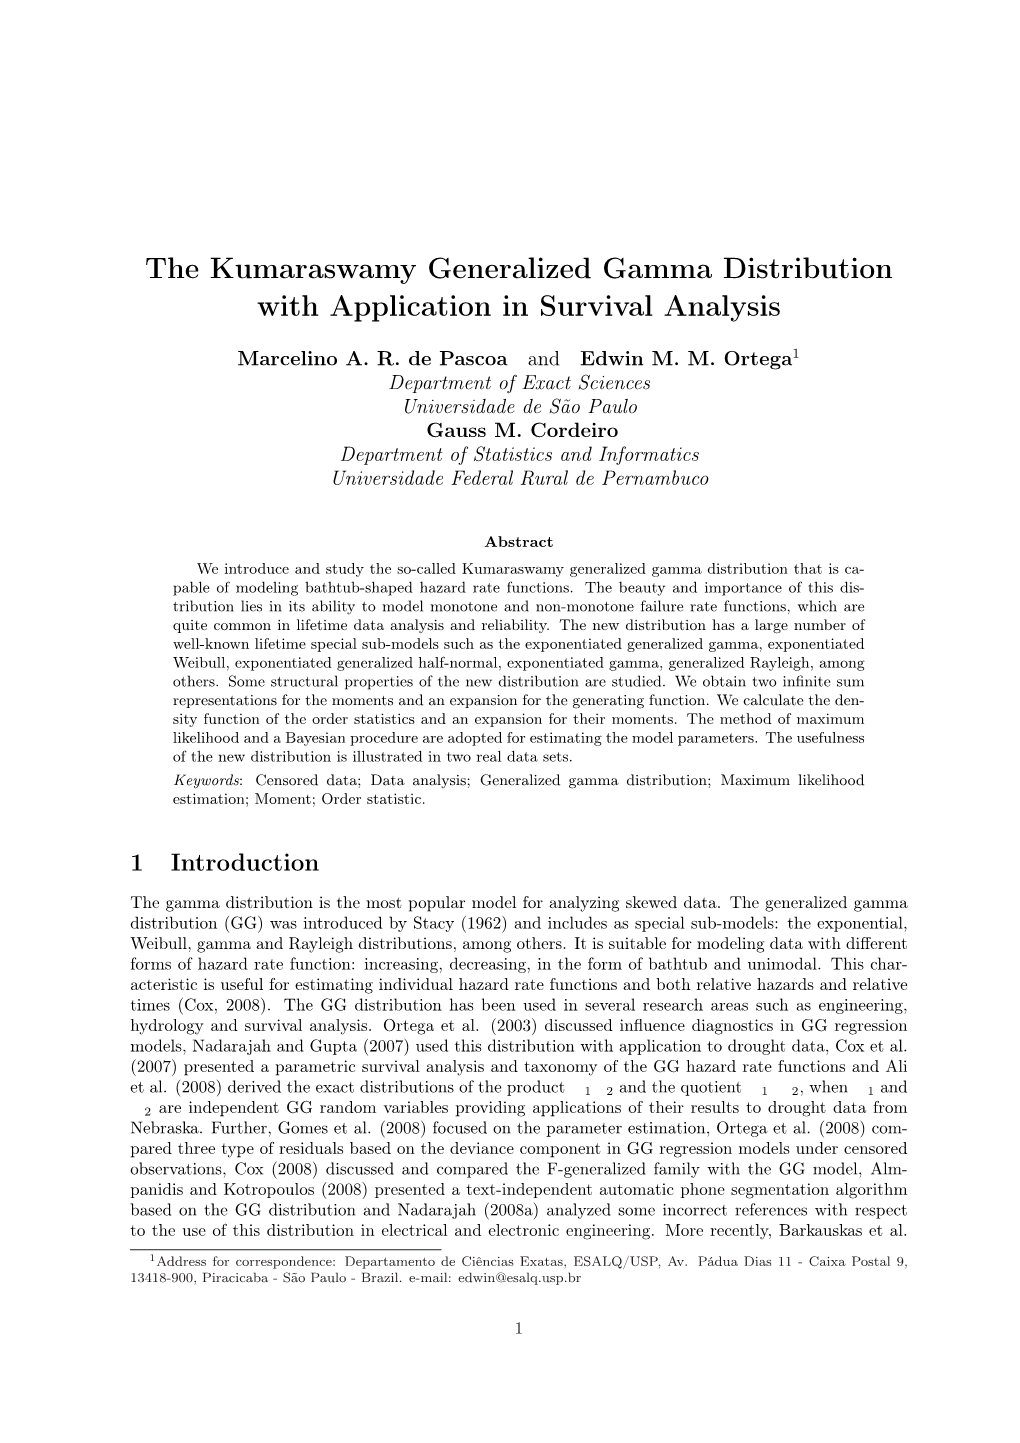 The Kumaraswamy Generalized Gamma Distribution with Application in Survival Analysis